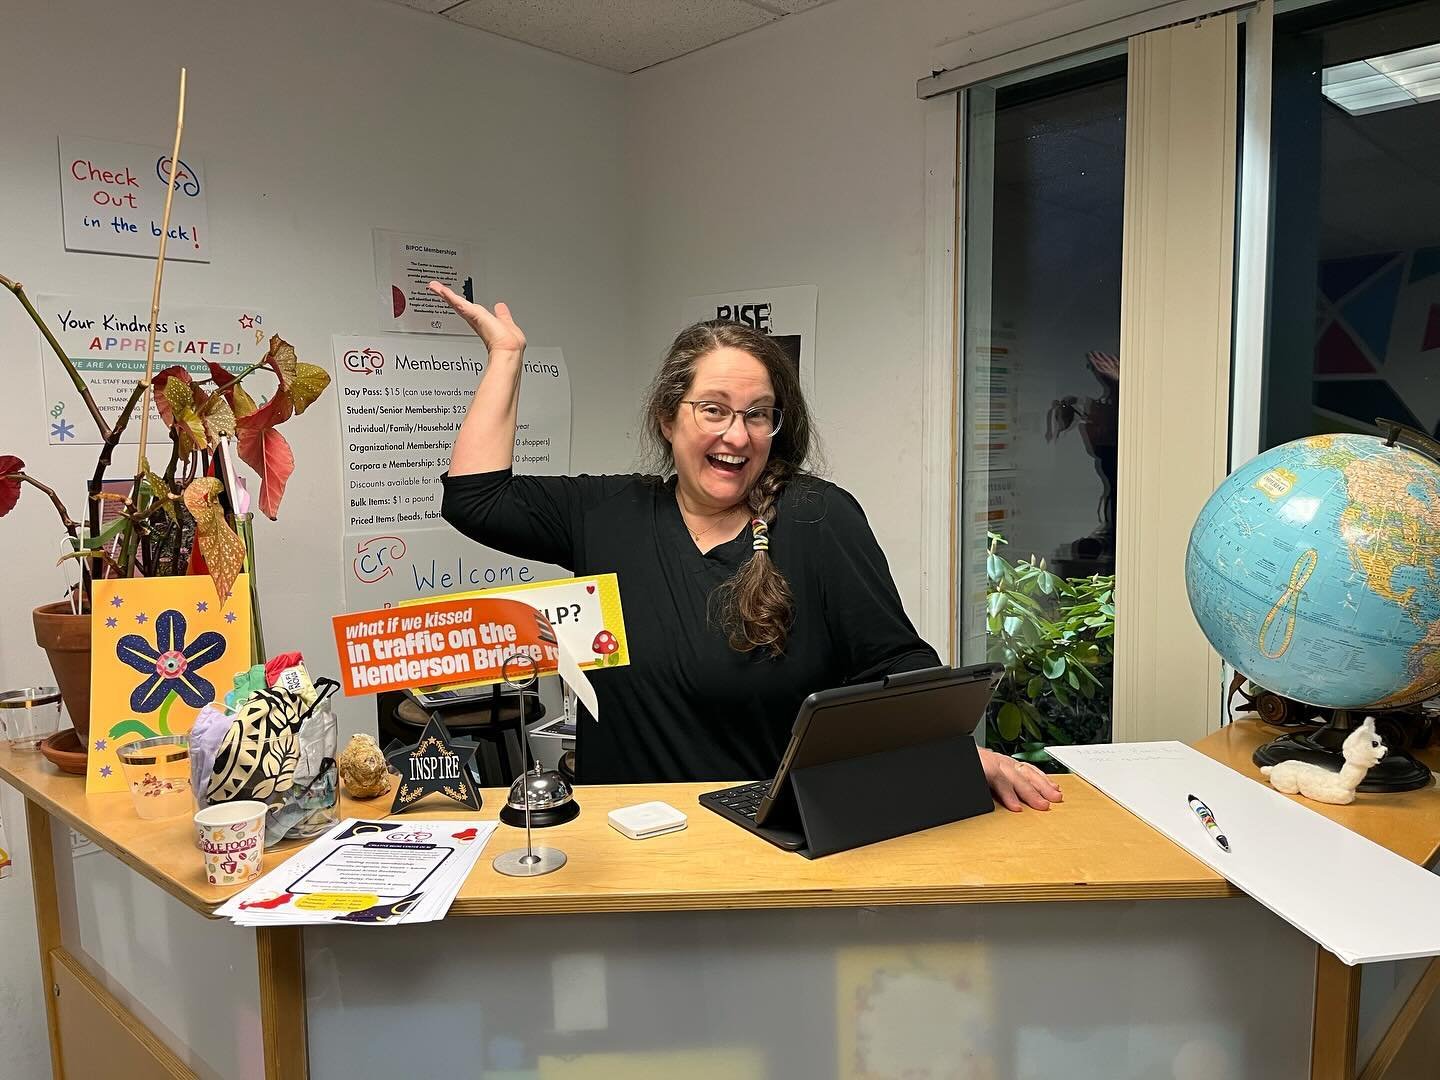 Three cheers for Marie, our Event Coordinator!

Thank you for making the CRC come alive with community connections! We appreciate you!